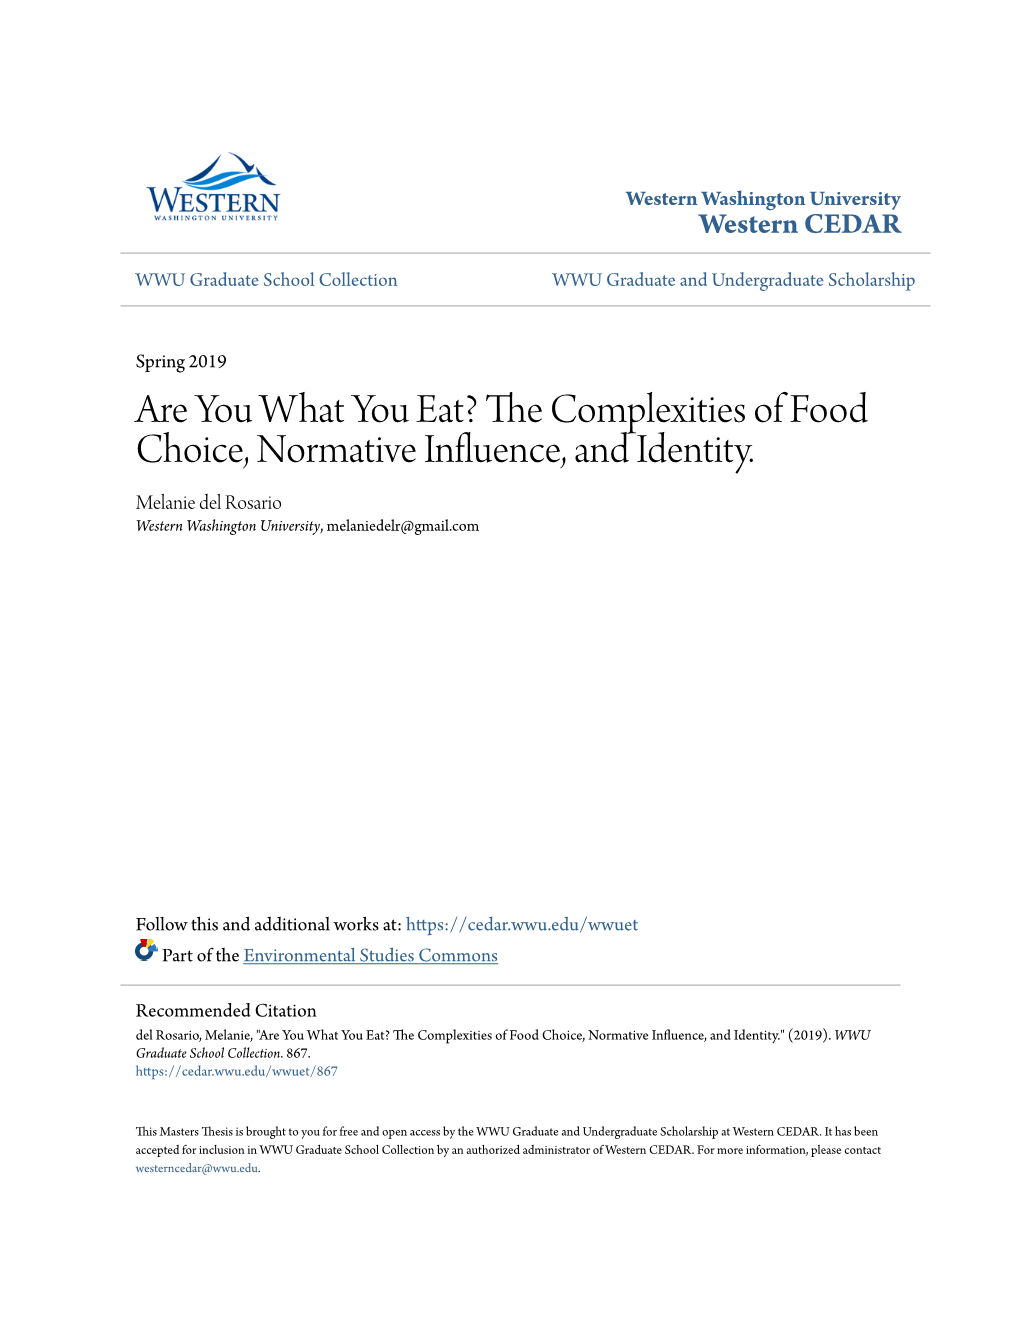 The Complexities of Food Choice, Normative Influence, and Identity